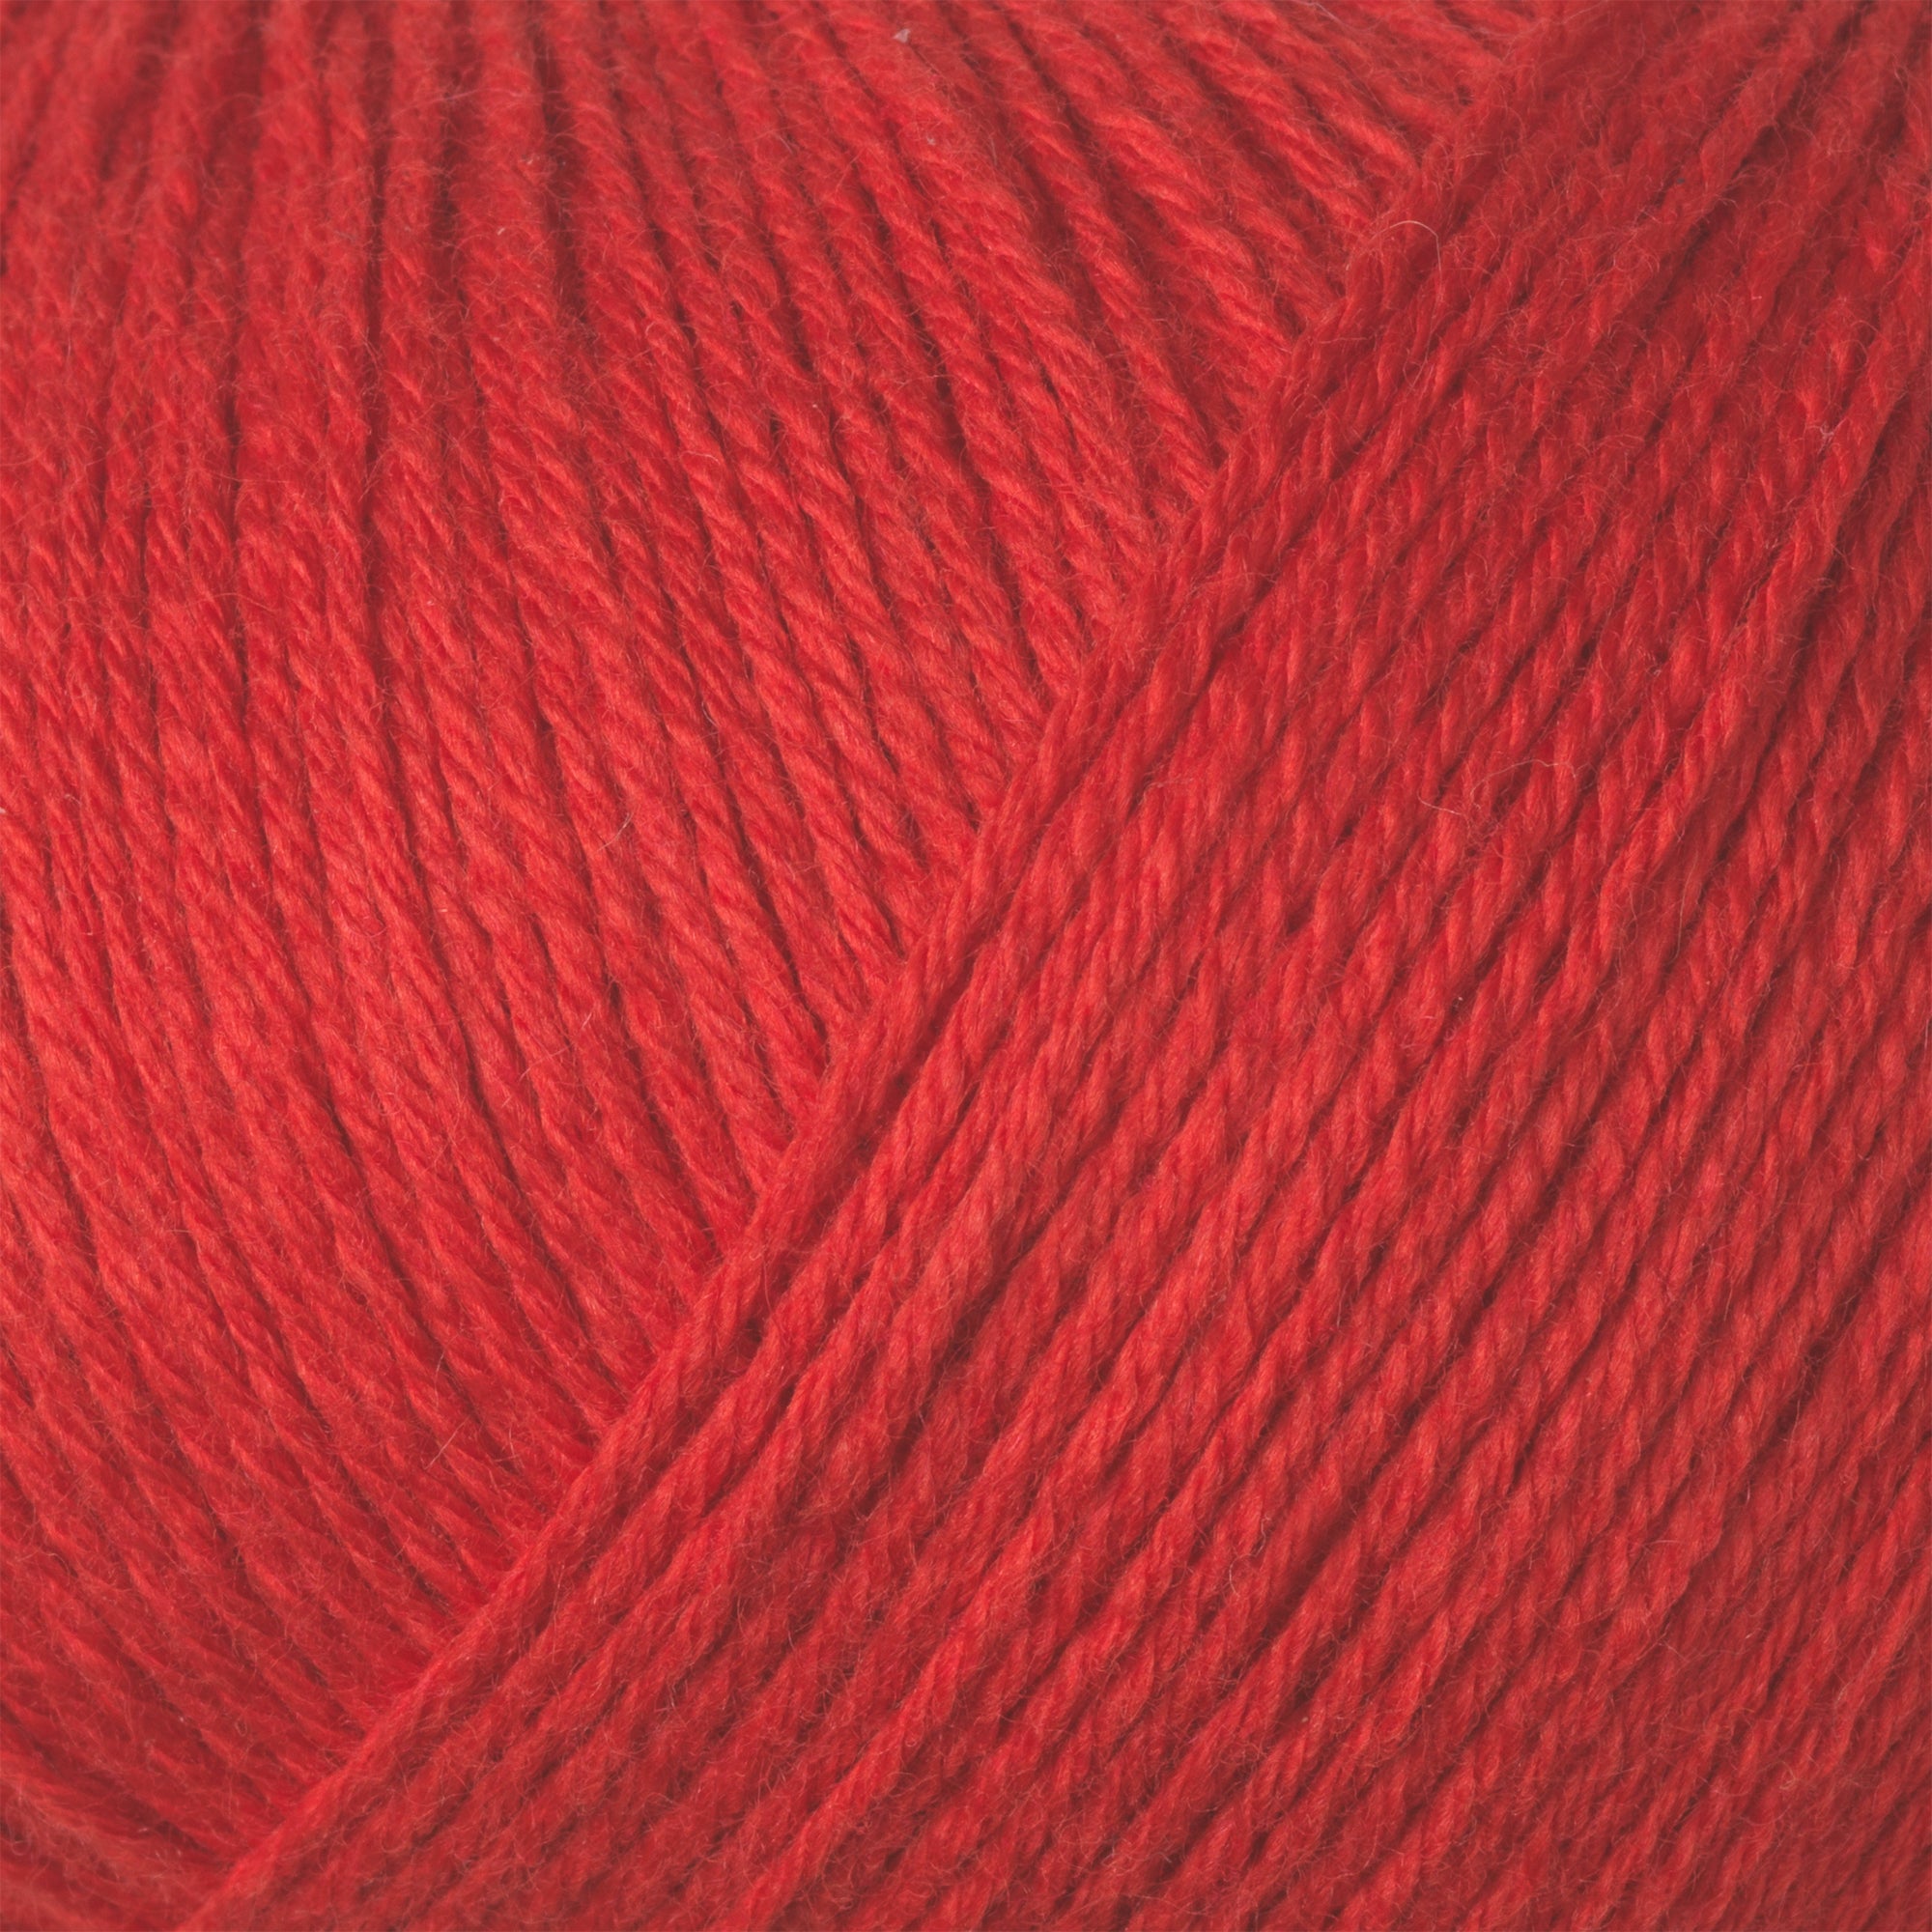 Knitting for Olive Cotton Merino - Red Currant